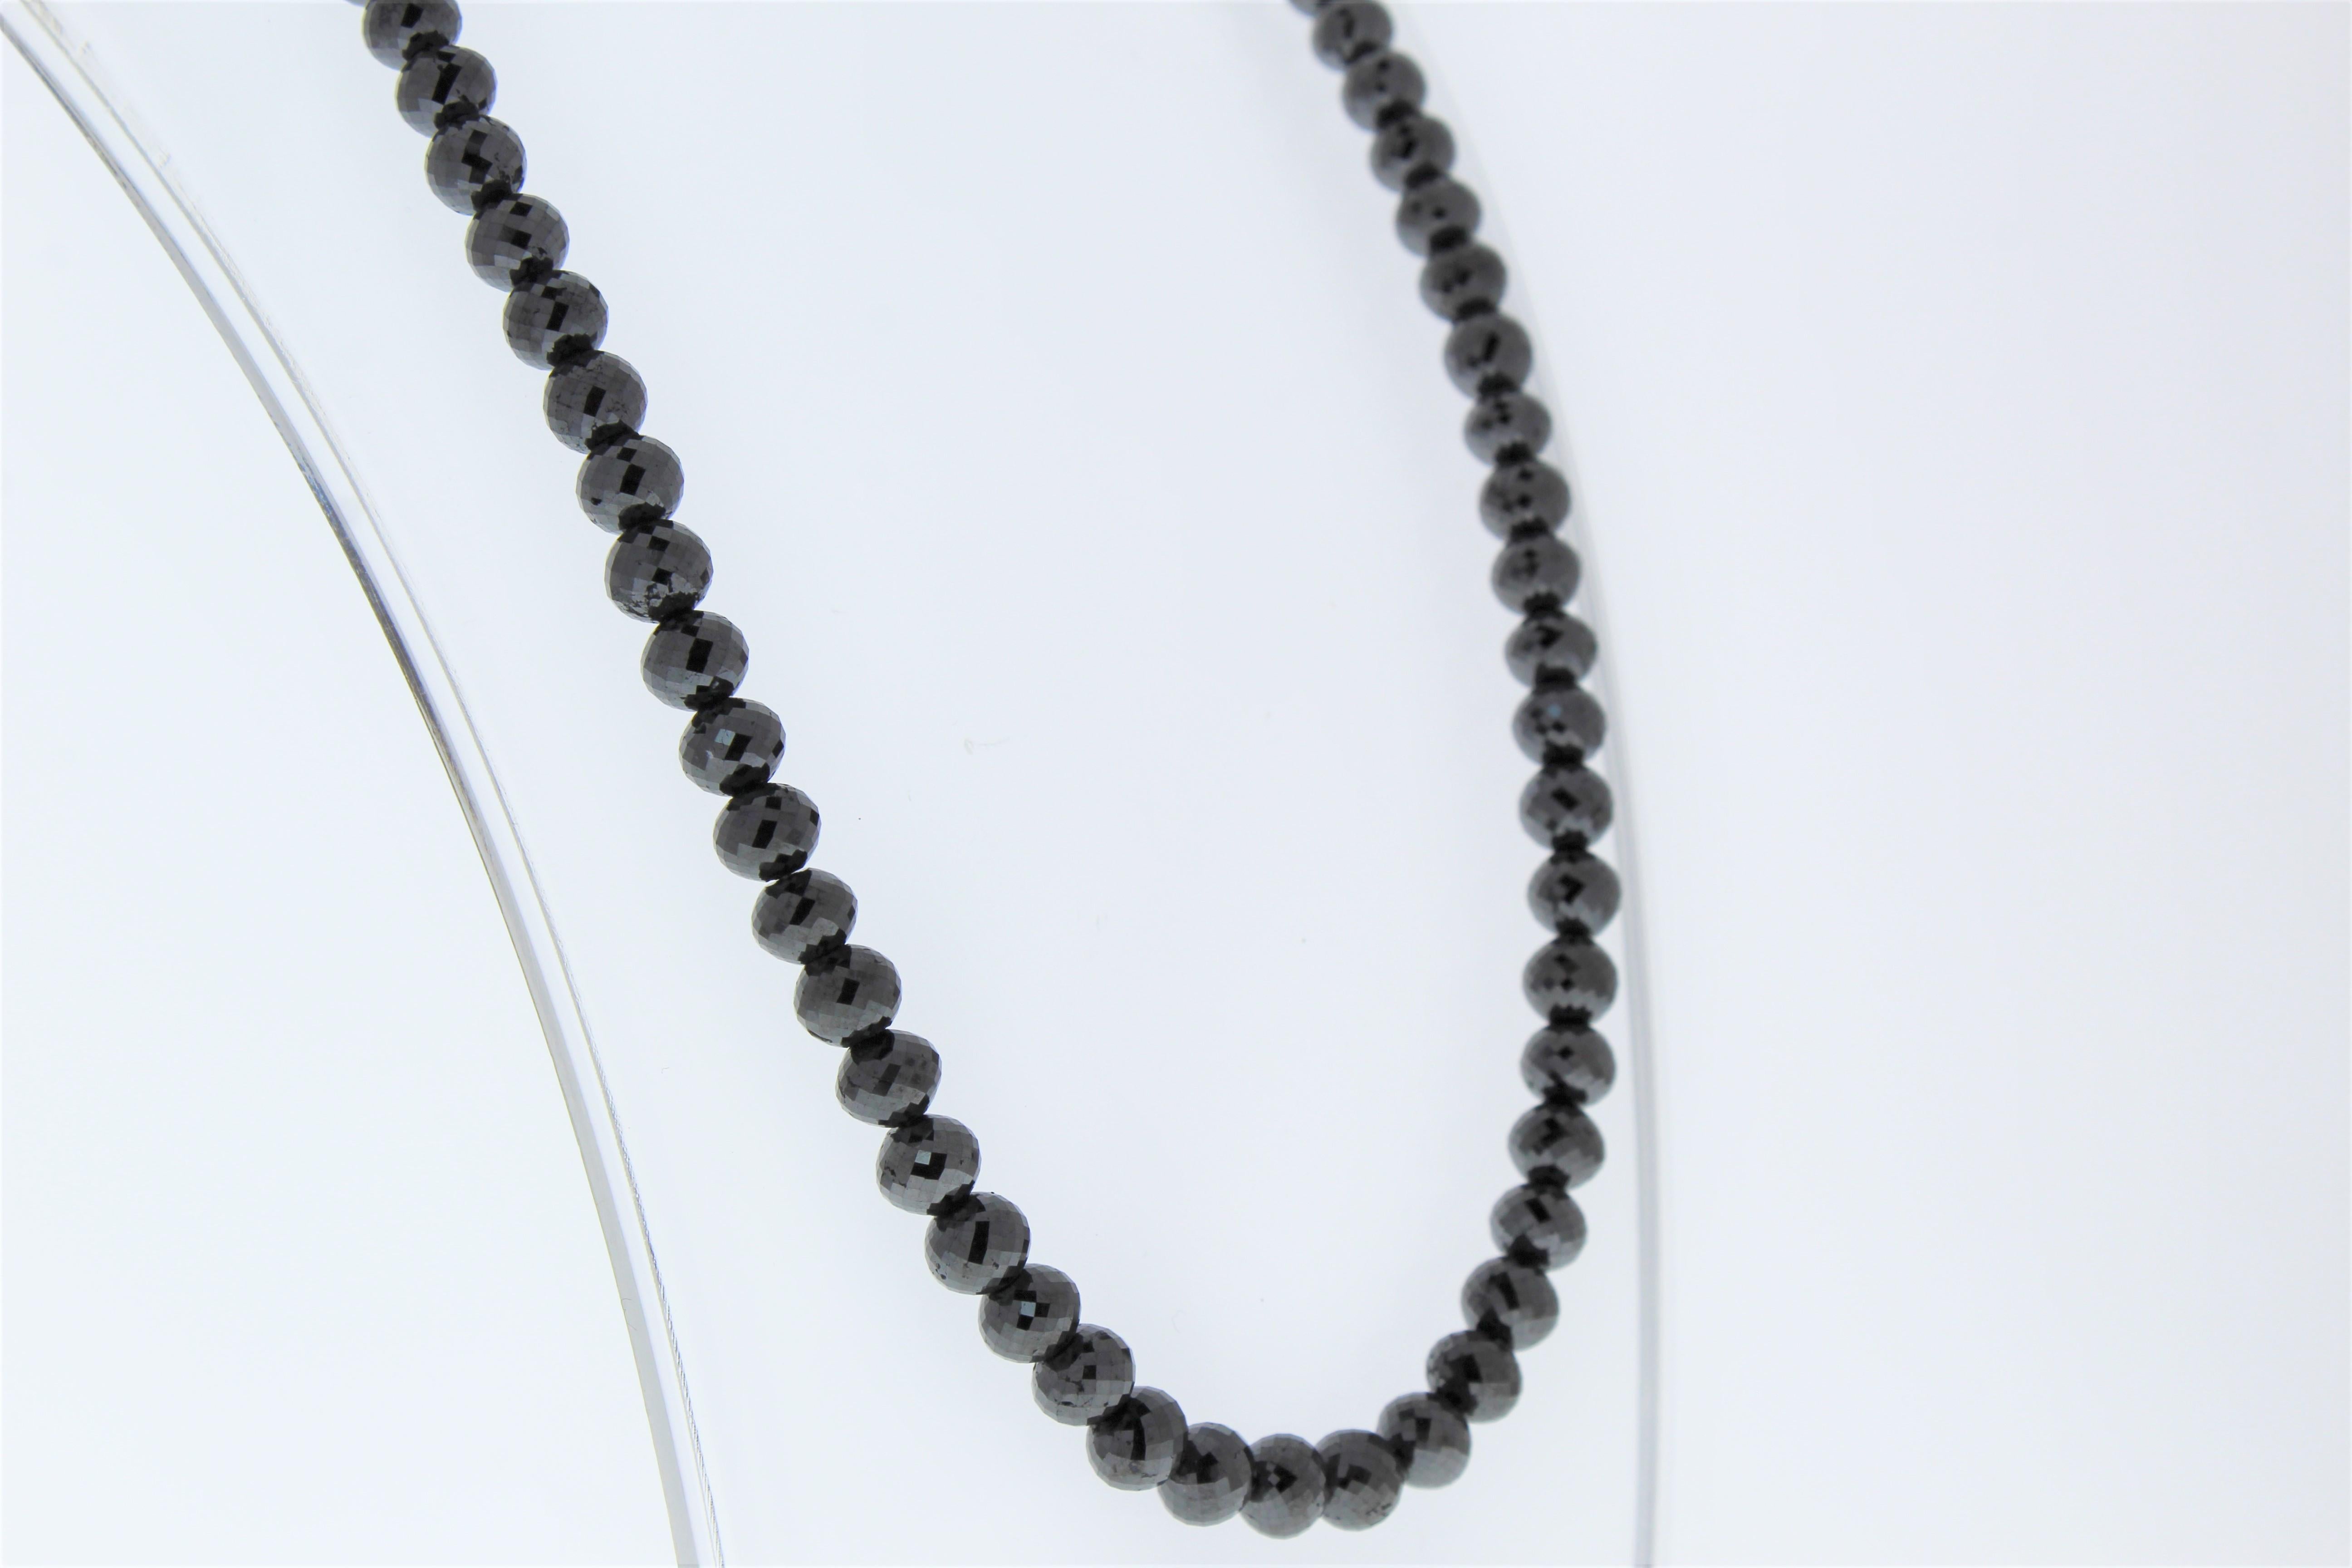 This necklace is a dramatic strand of 81 faceted briolette black diamonds totaling 159.92carats. Slim in design and perfect for layering alongside other necklaces and chains, this black diamond necklace is sure to get noticed.